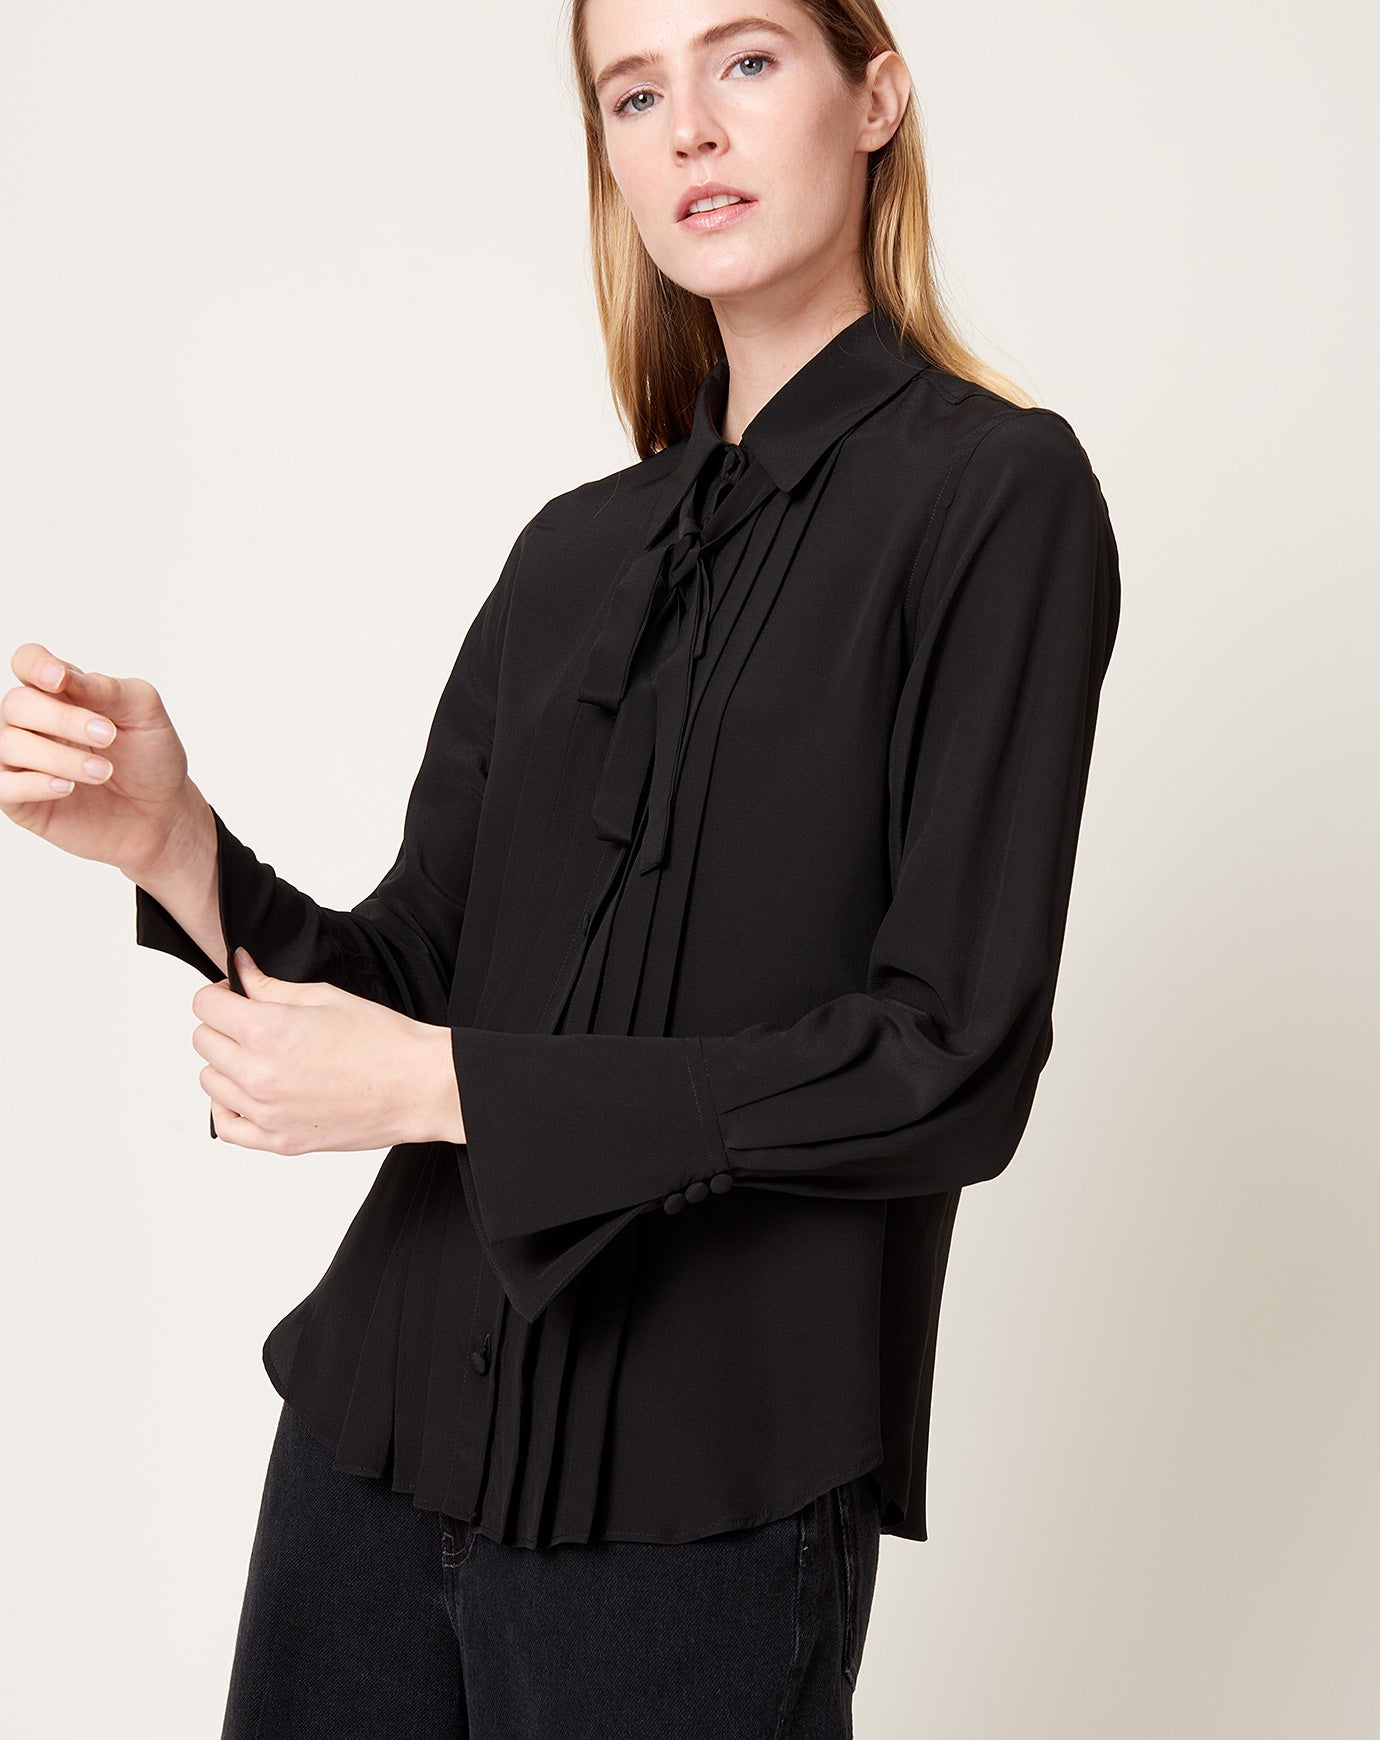 A'Court Iris Blouse in Black